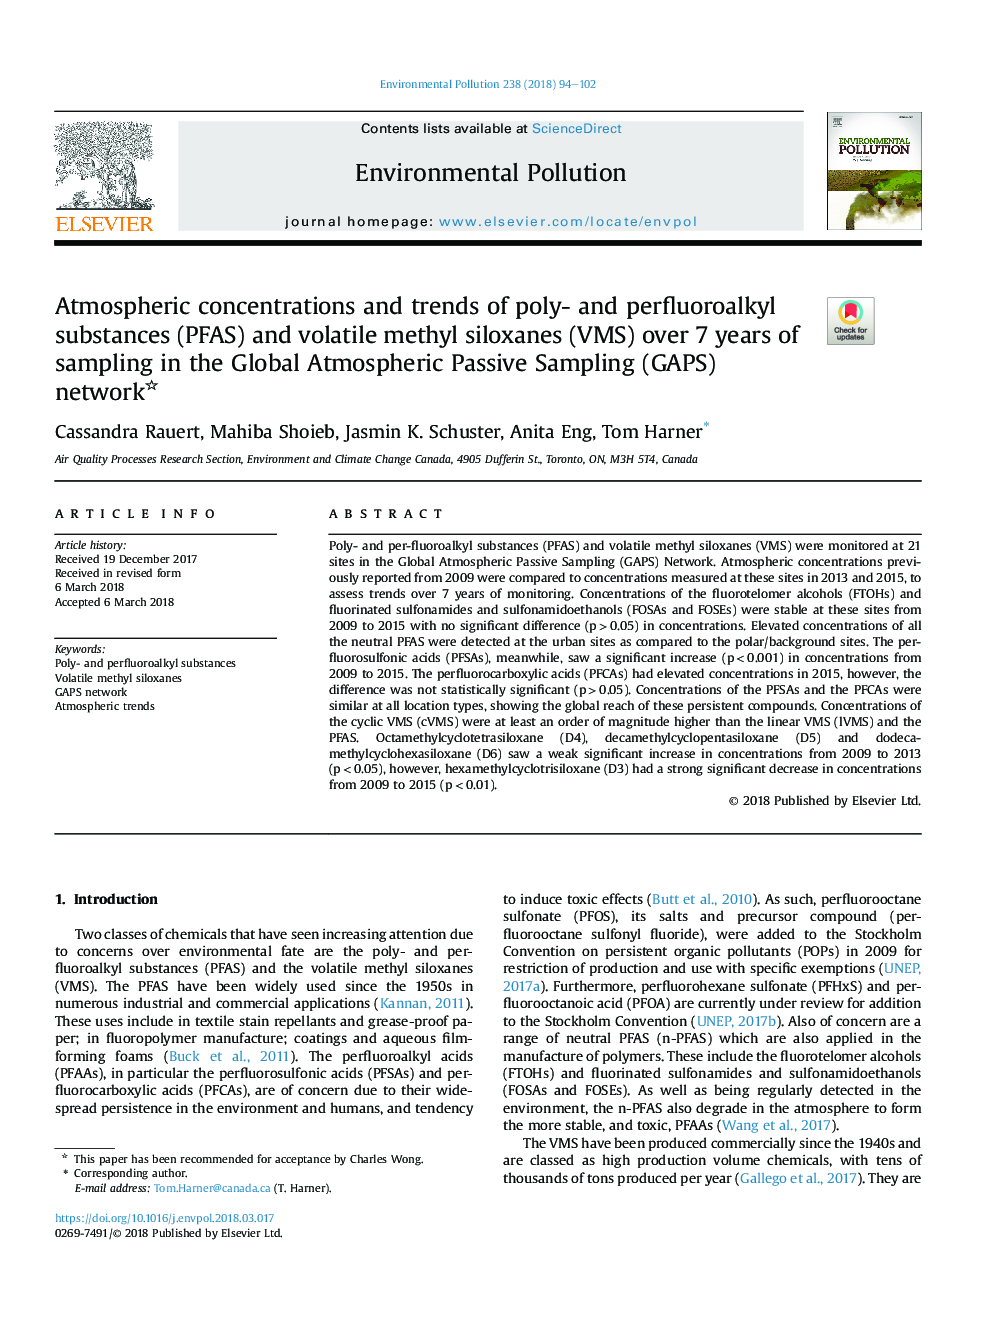 Atmospheric concentrations and trends of poly- and perfluoroalkyl substances (PFAS) and volatile methyl siloxanes (VMS) over 7 years of sampling in the Global Atmospheric Passive Sampling (GAPS) network